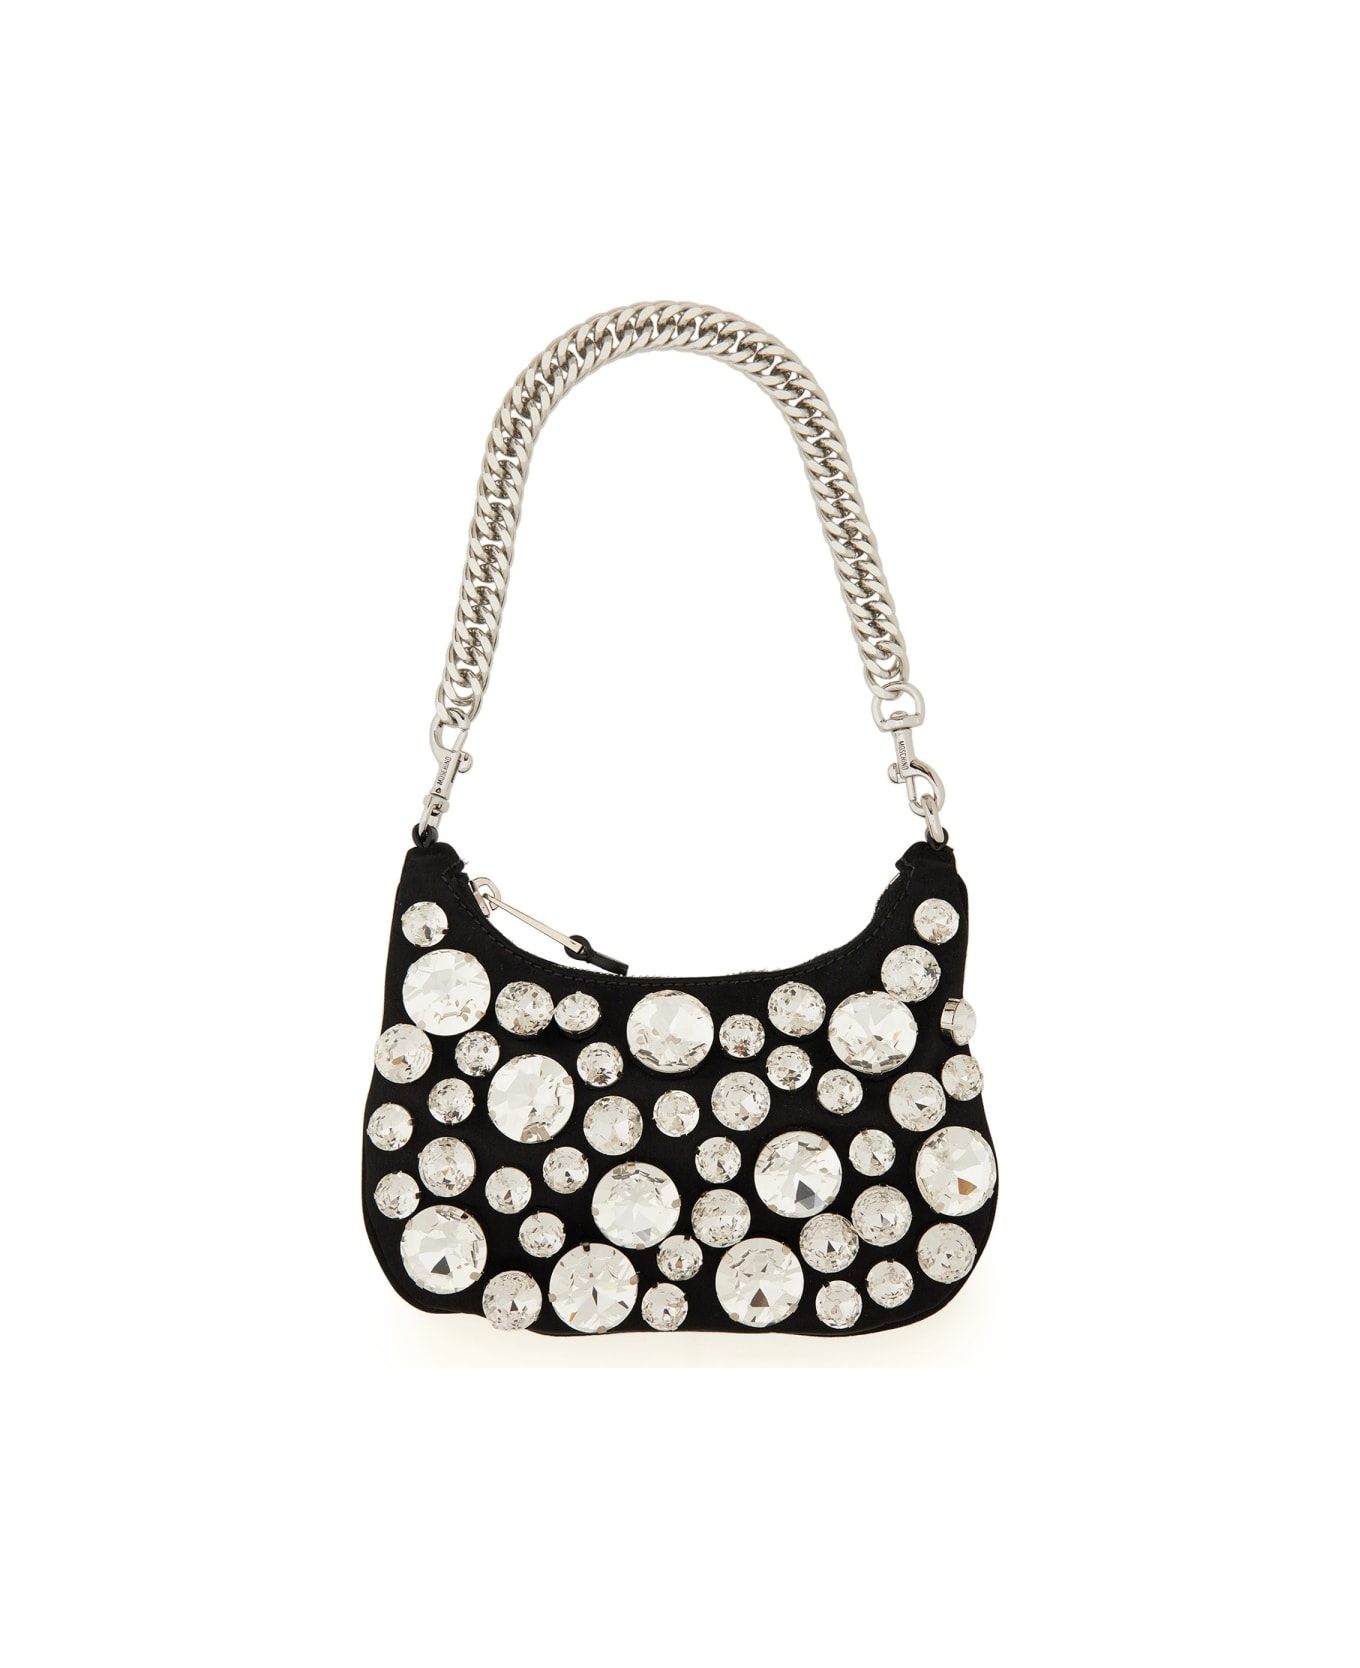 Moschino Bag With Chain - BLACK